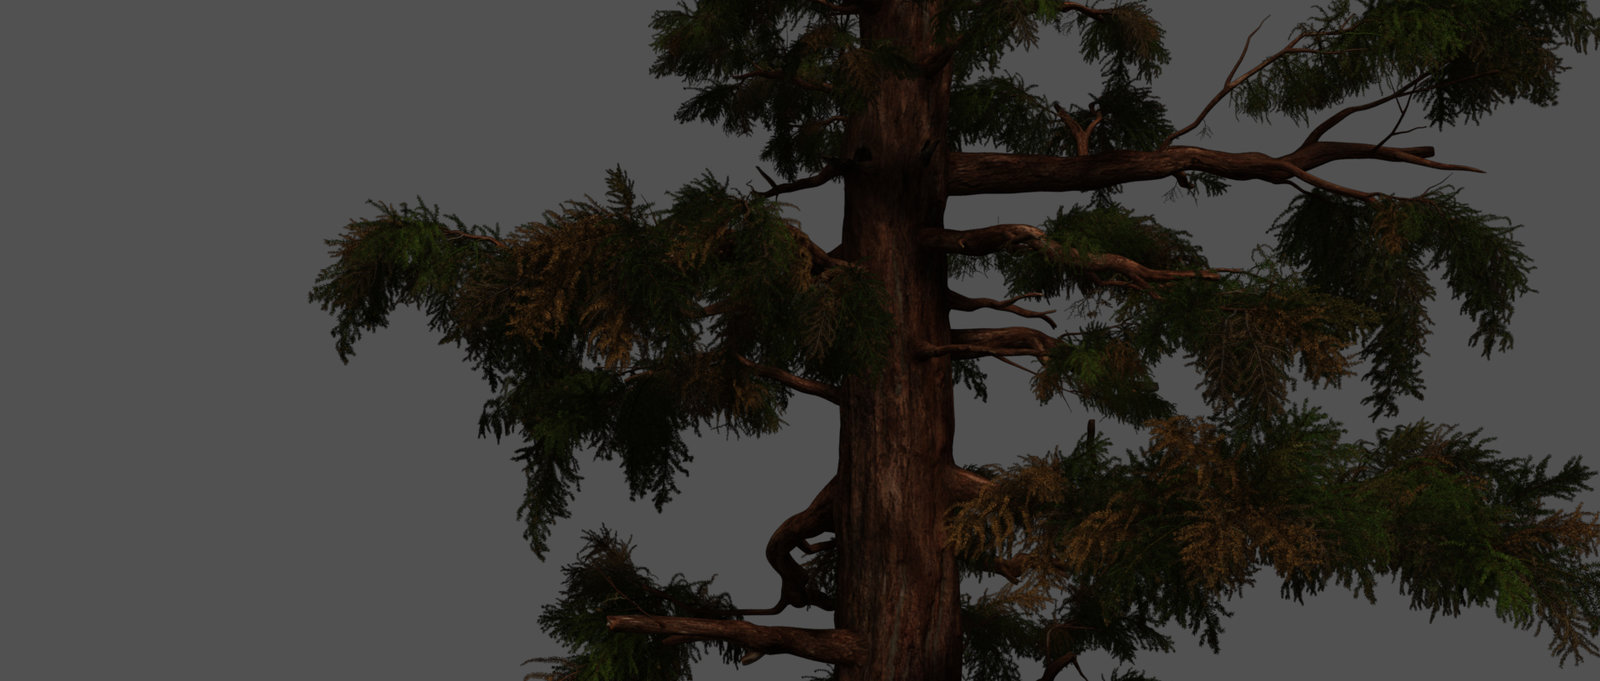 One of many 'GEN' Trees. I textured &amp; lookdev'd all Pine Forest Trees &amp; Foliage